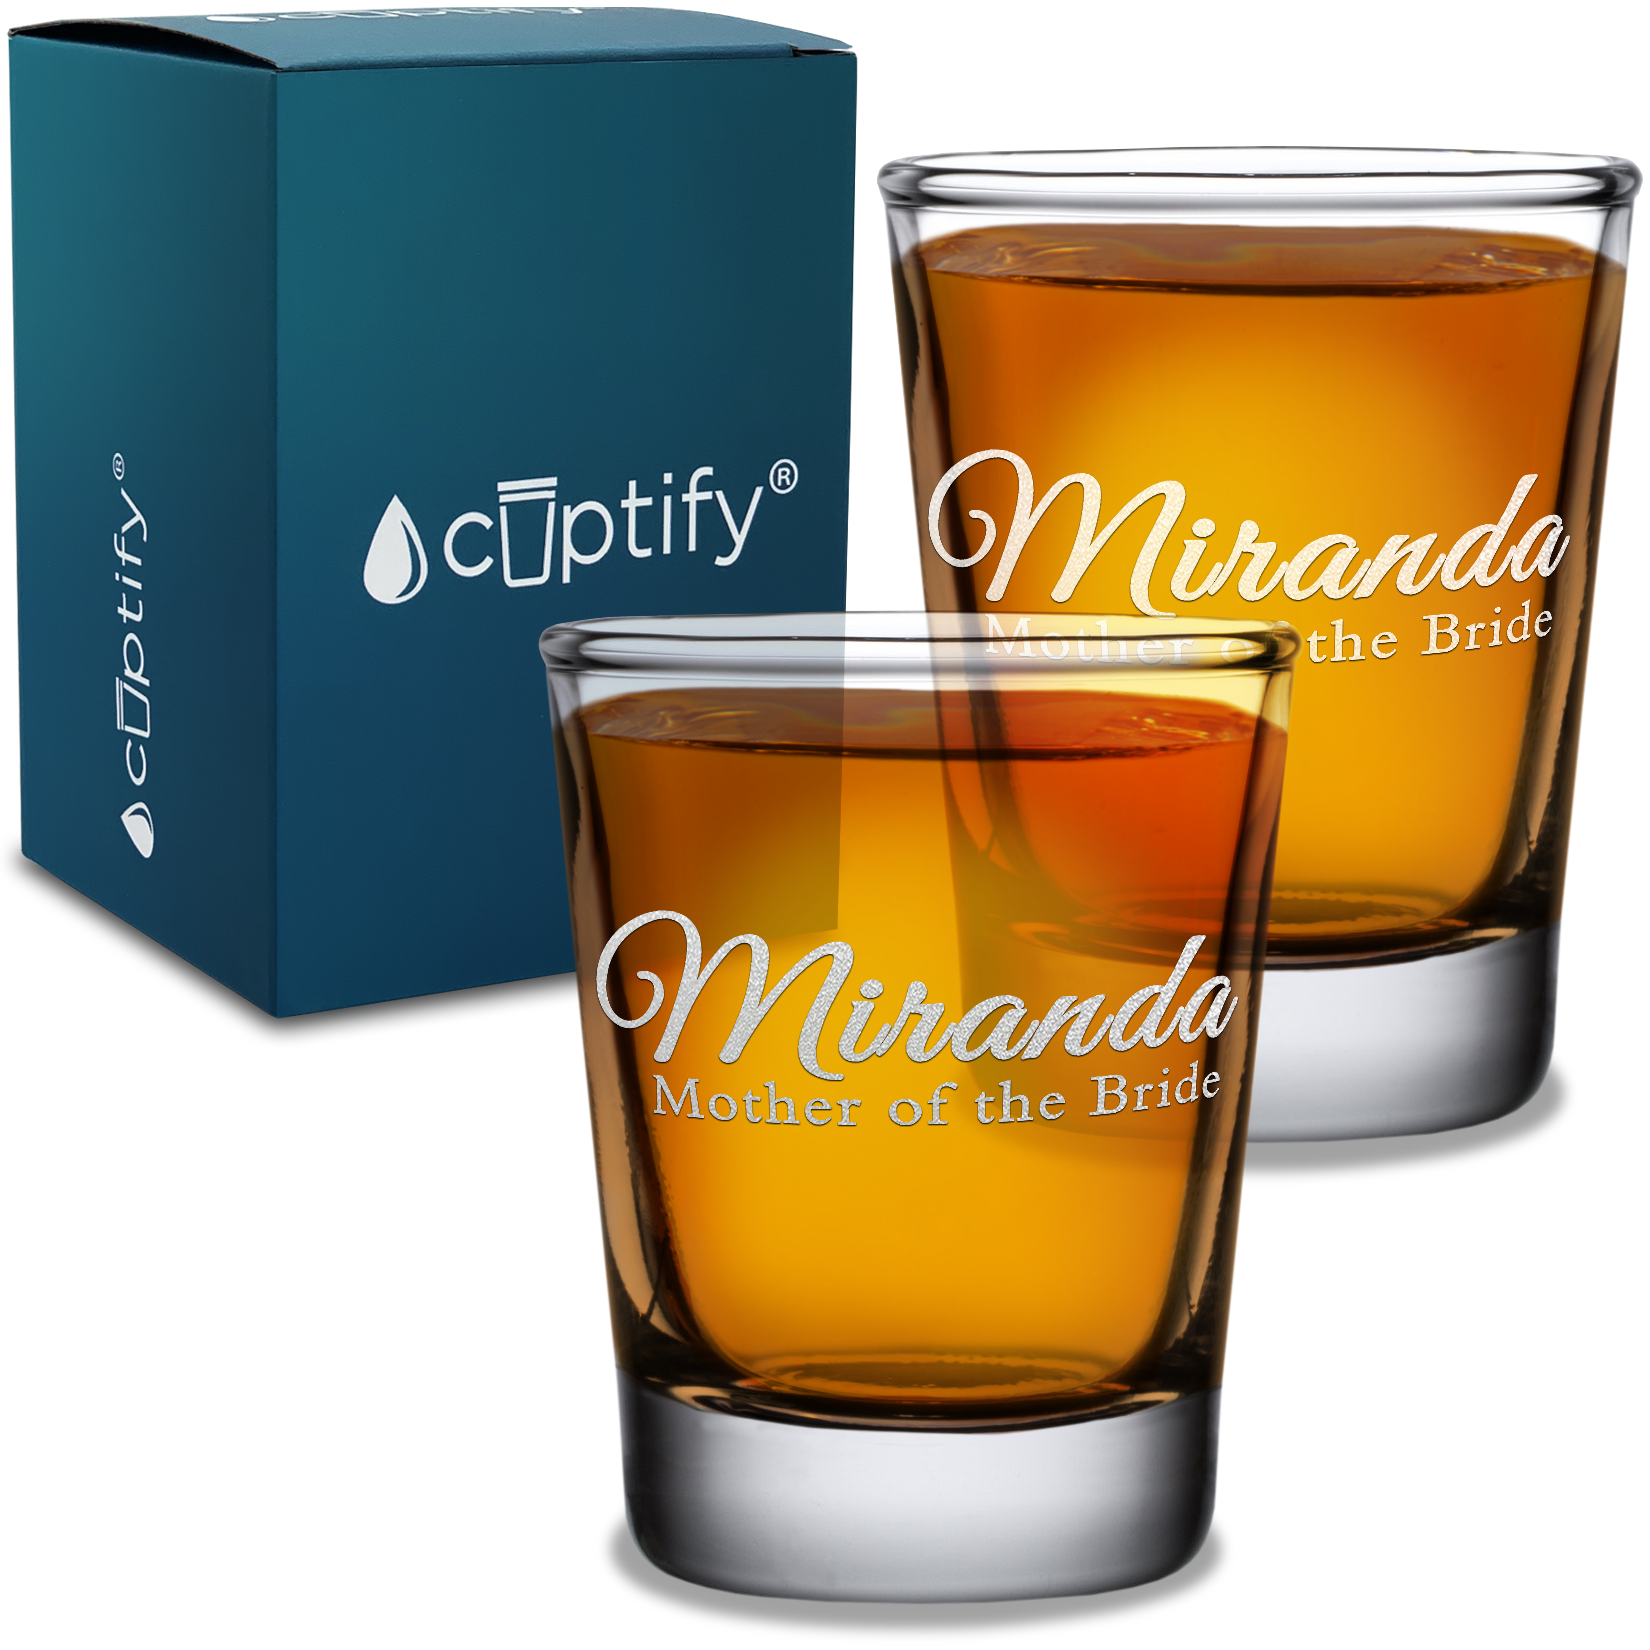  Personalized Mother of the Bride Etched on 2oz Shot Glasses - Set of 2